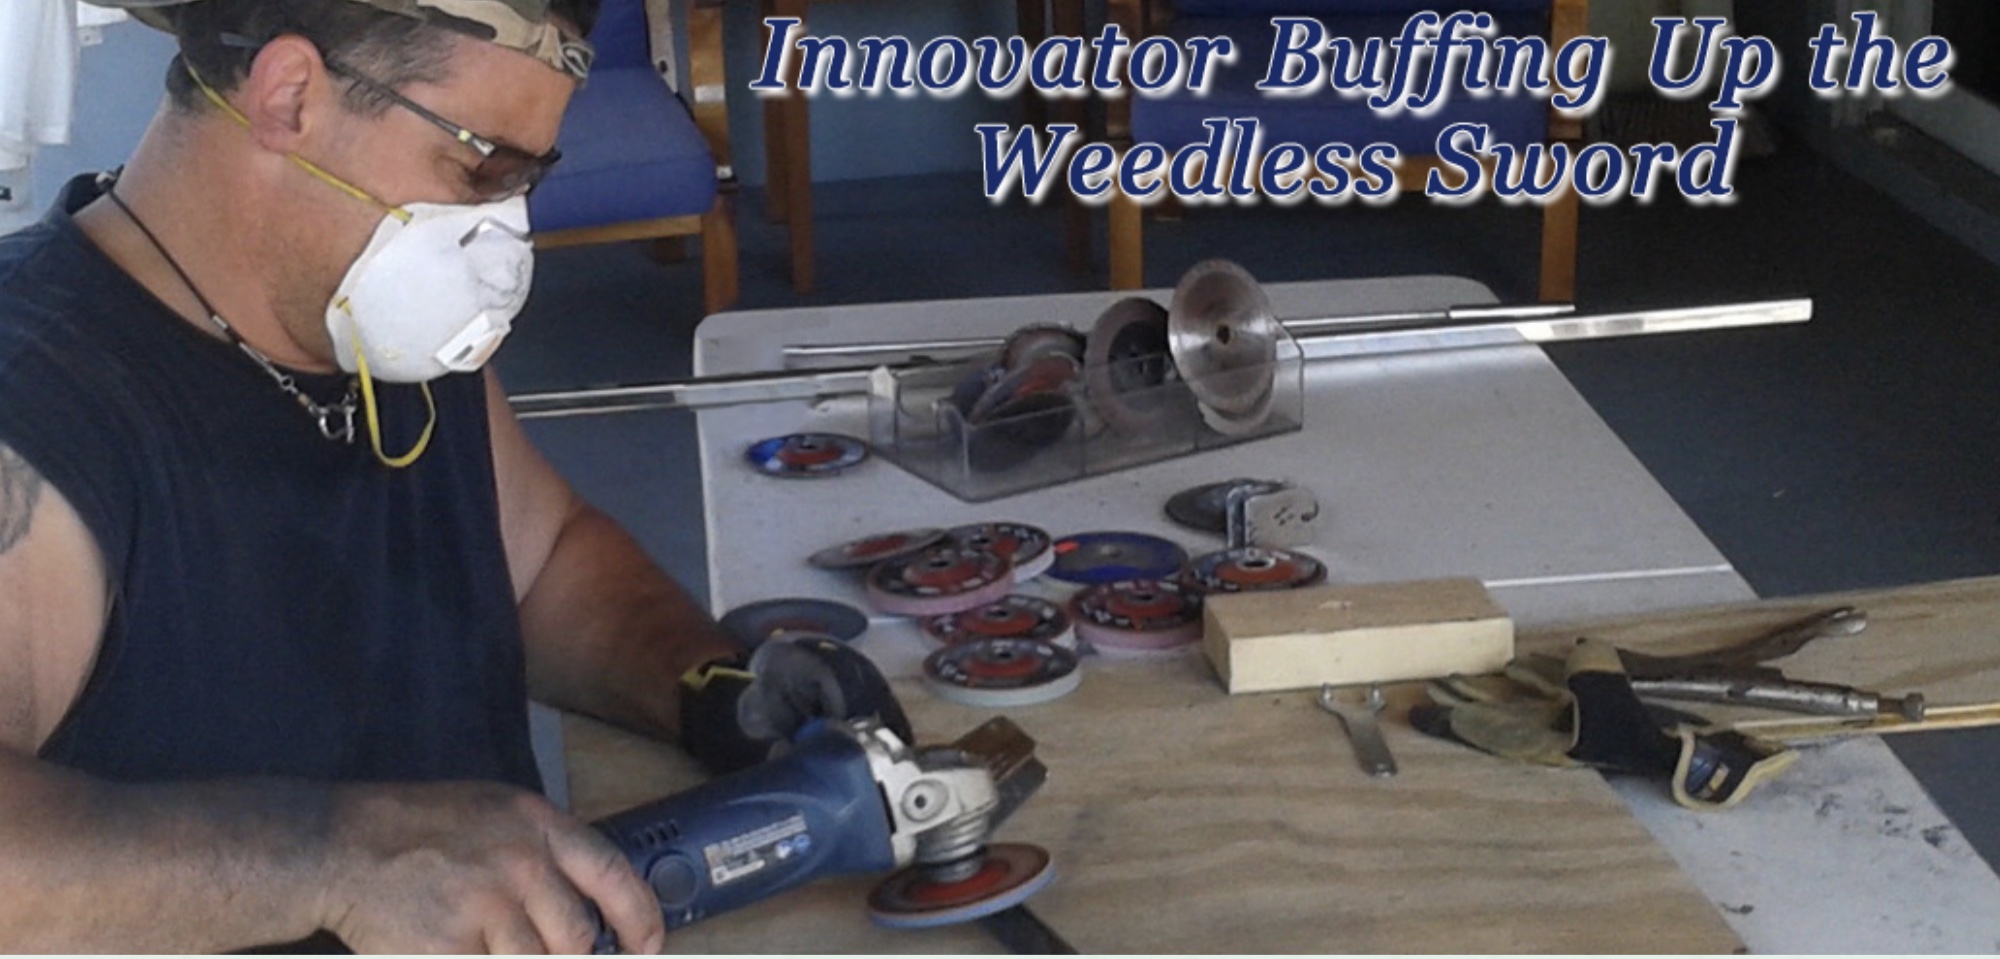 The Innovator Buffing Up the Weedless Sword